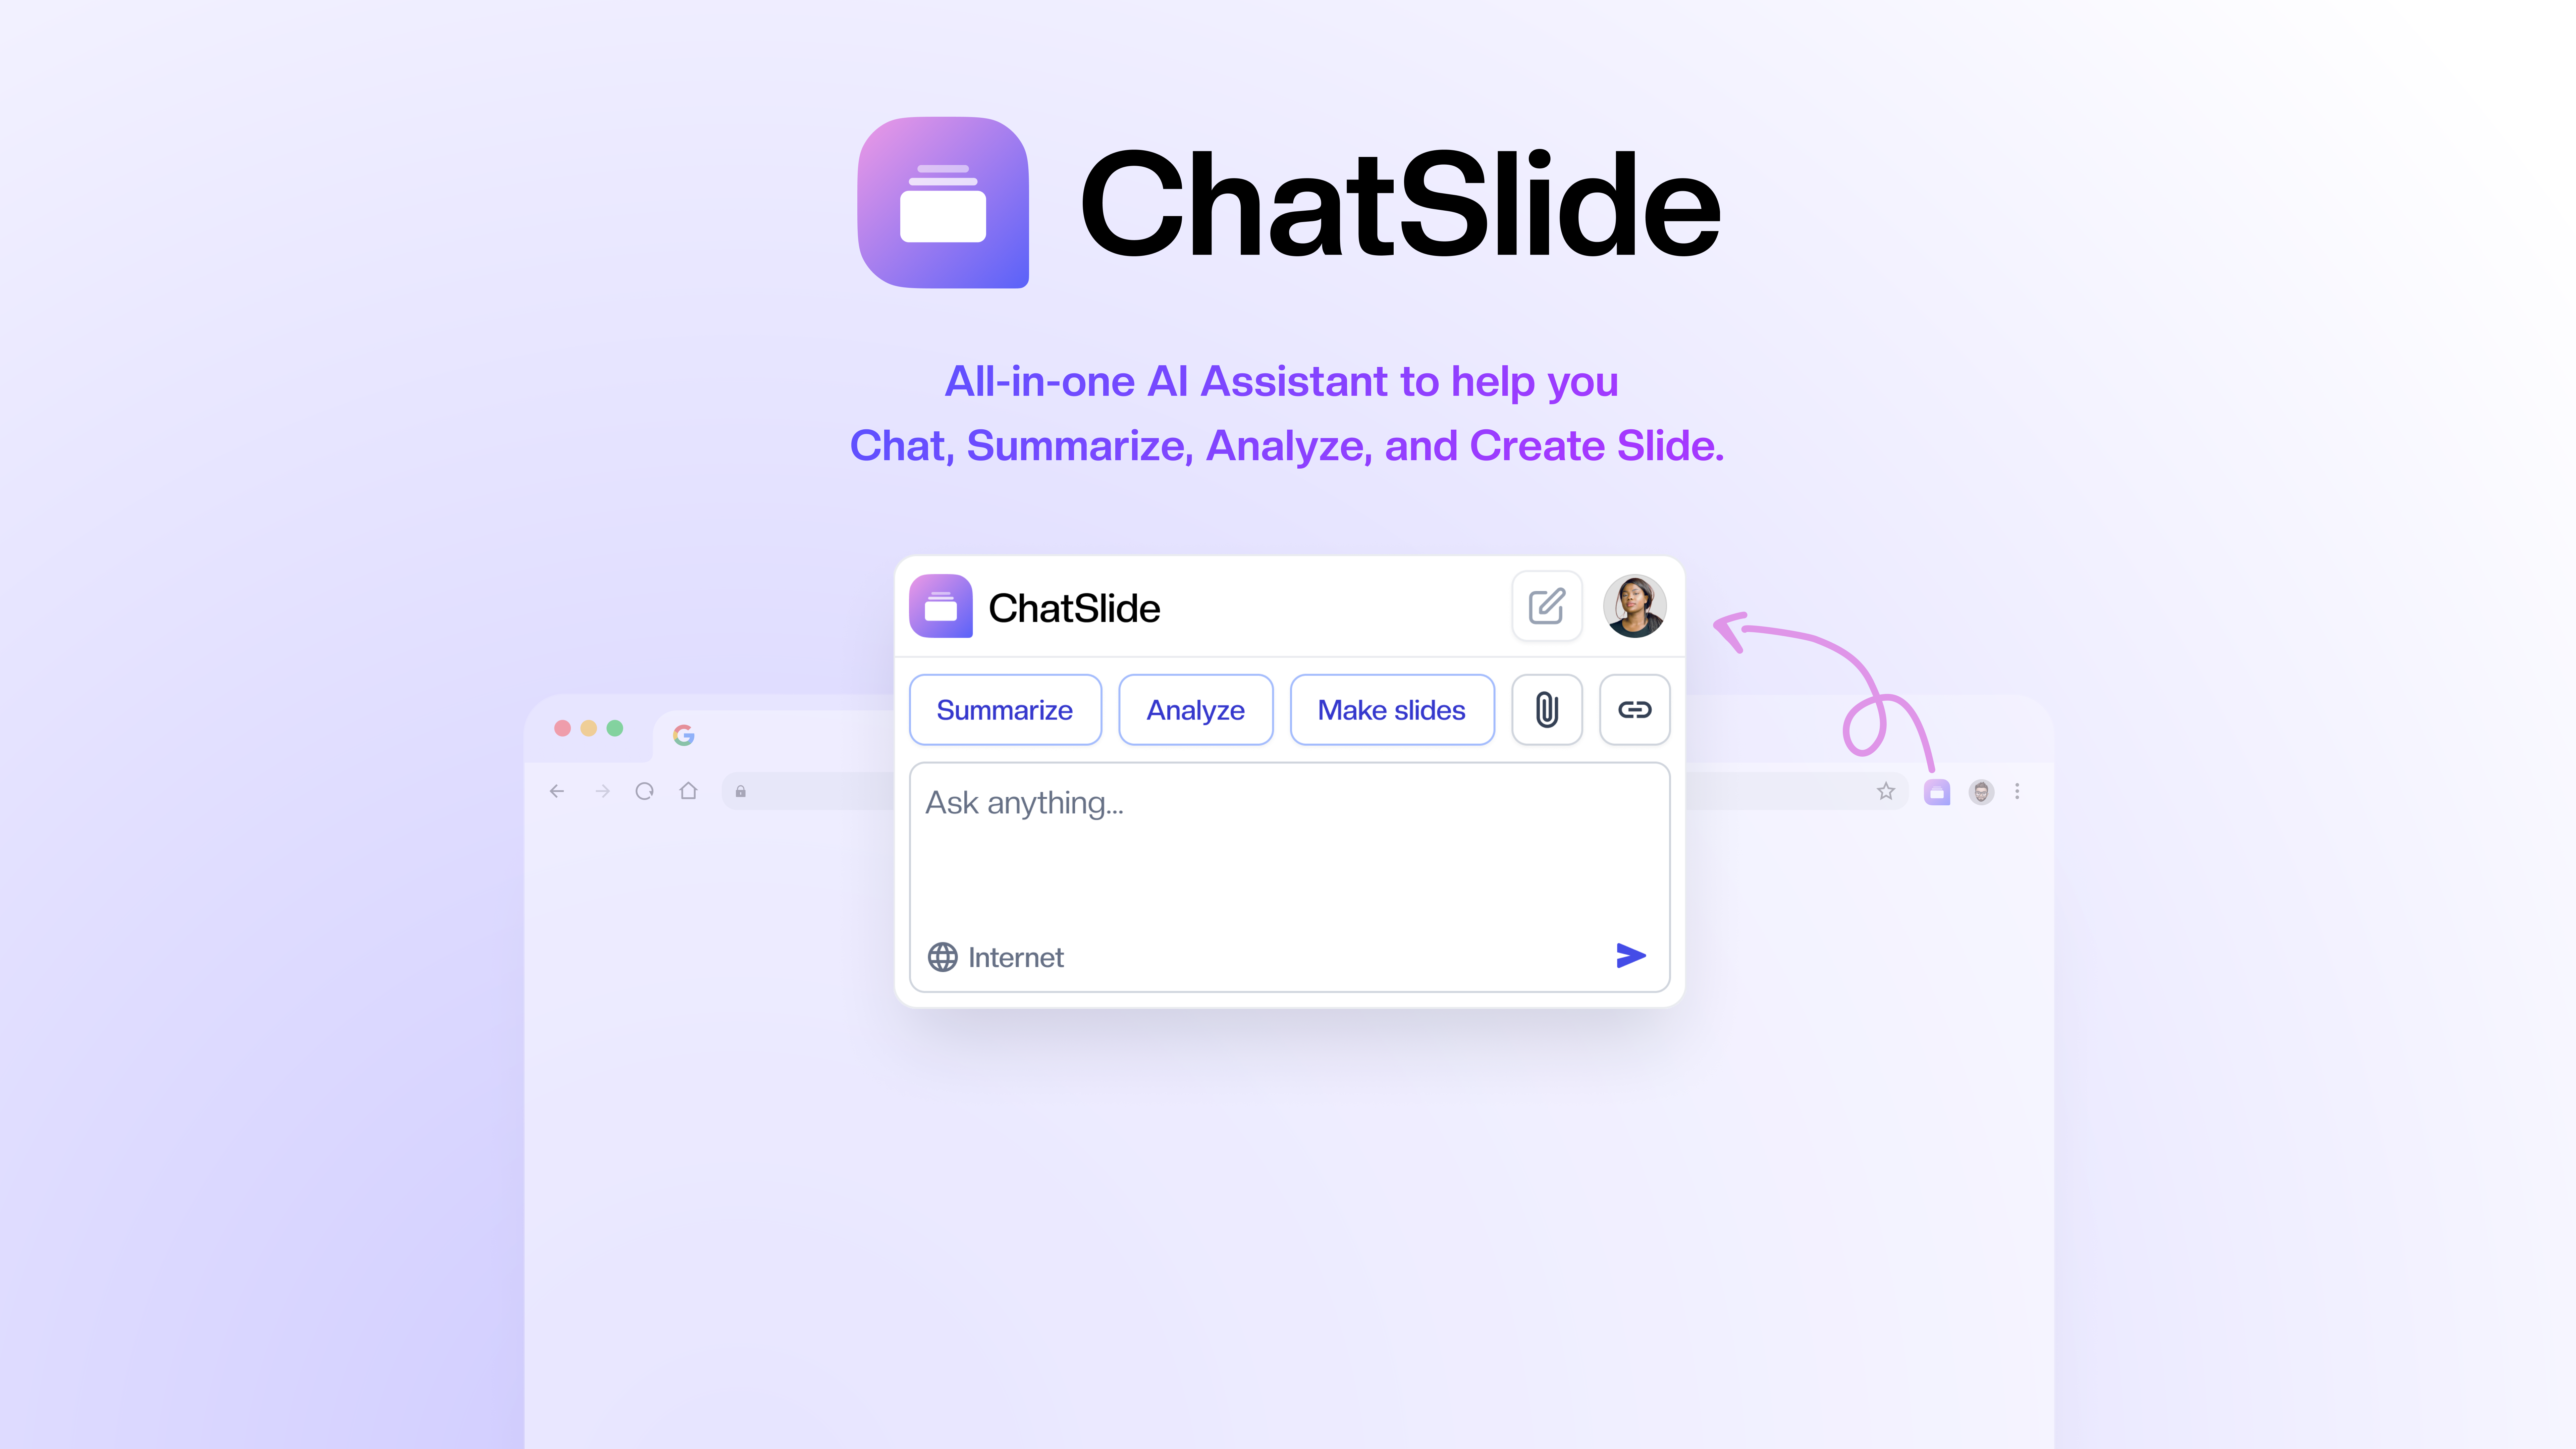 chatslide-ai - AI assistant for generating slides and video